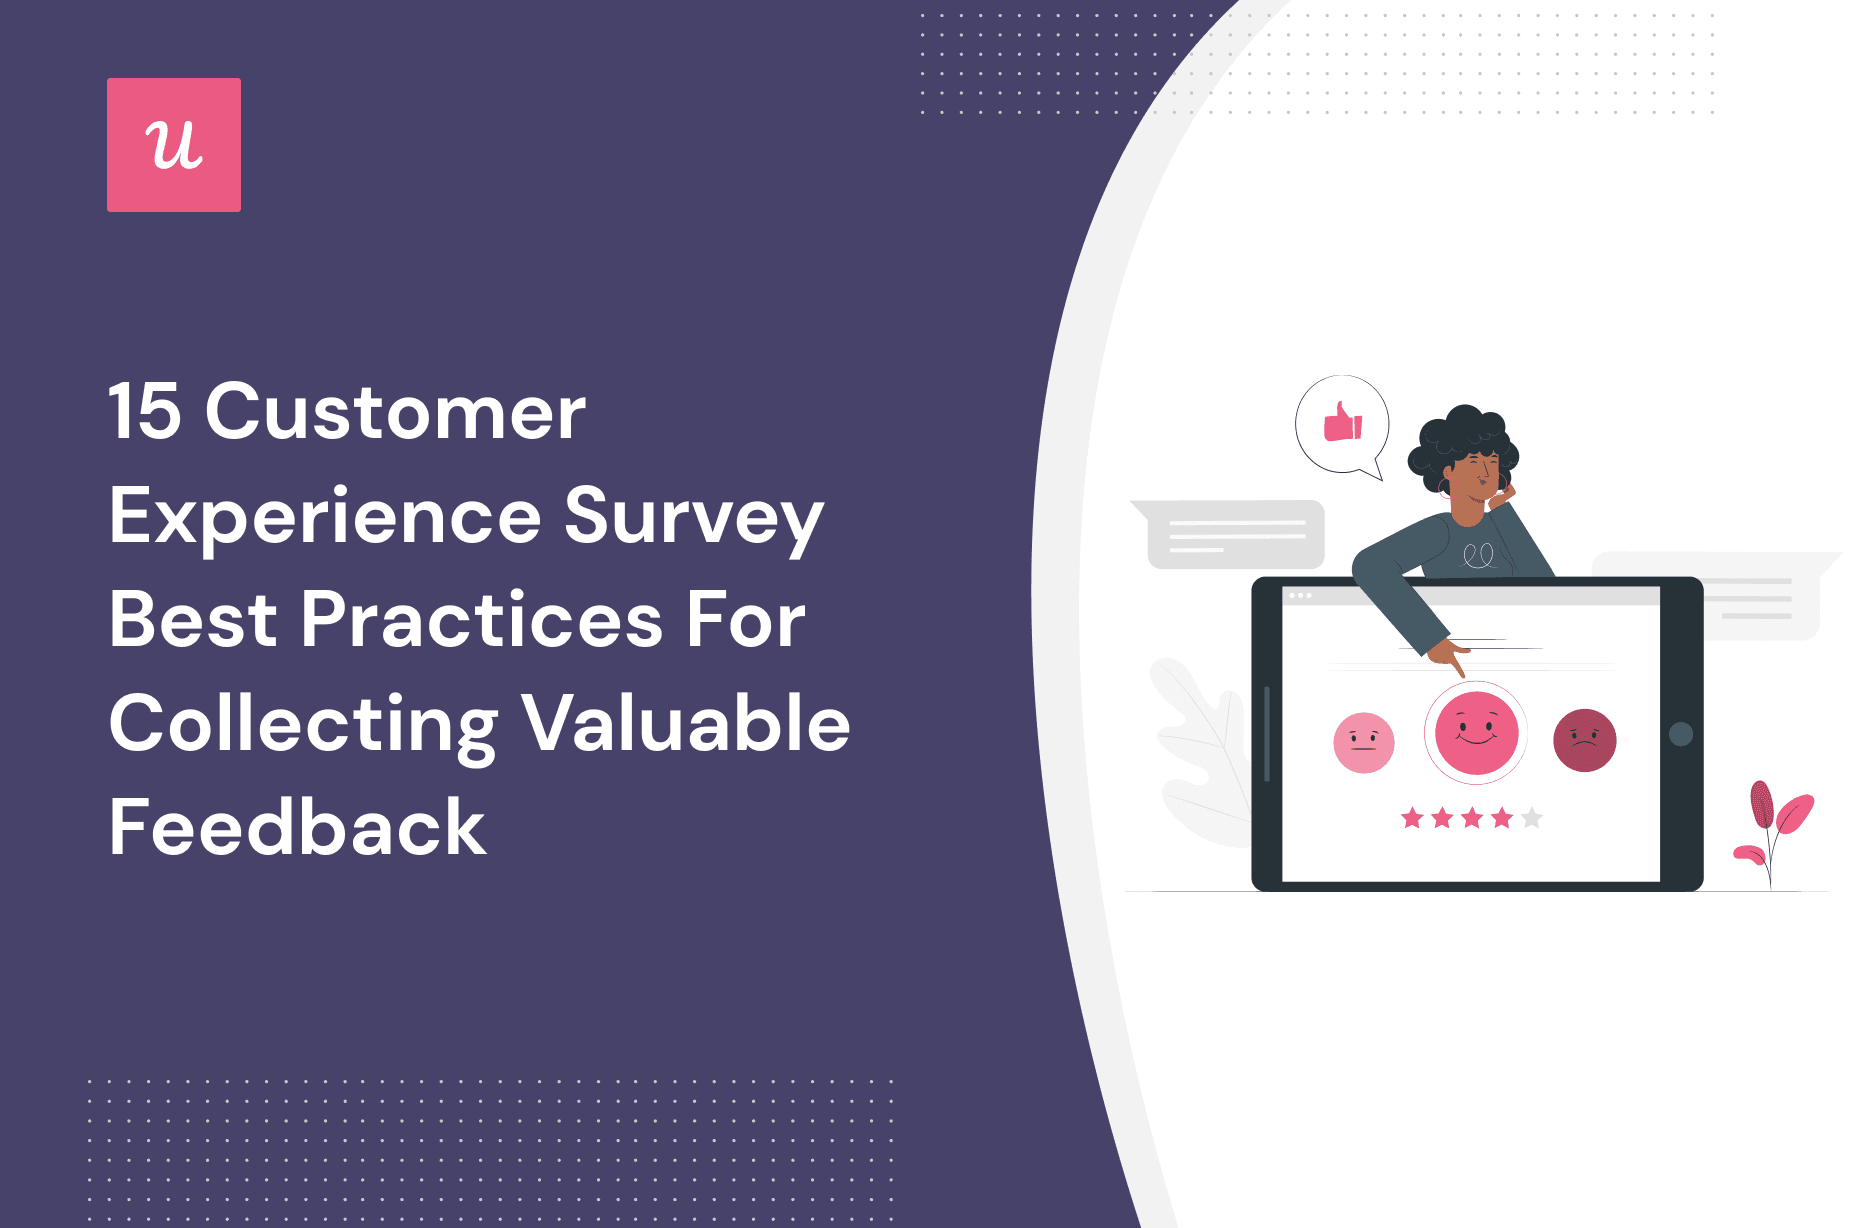 15 Customer Experience Survey Best Practices For Collecting Valuable Feedback cover